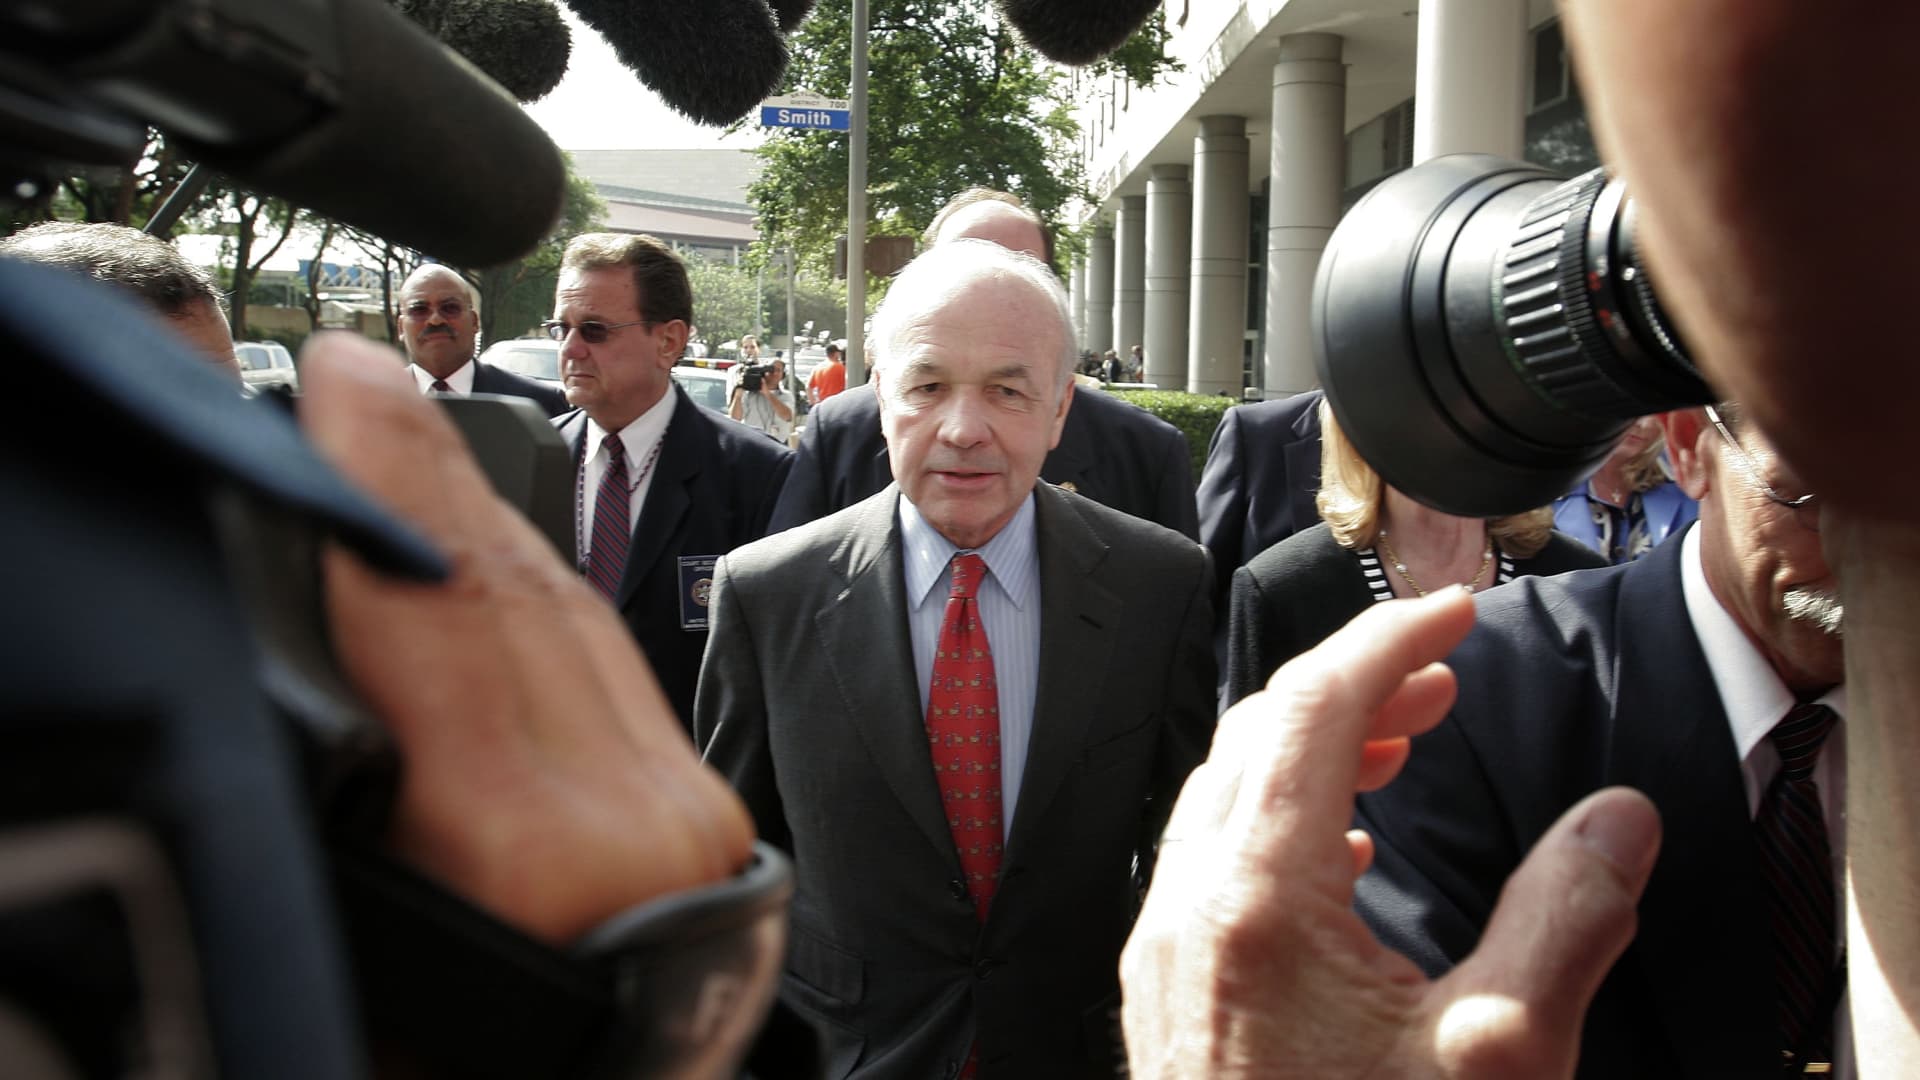 Former Enron chairman Kenneth Lay (C) leaves the Bob Casey U.S. Courthouse after the day's proceedings in his fraud and conspiracy trial, April 26, 2006, in Houston, Texas.